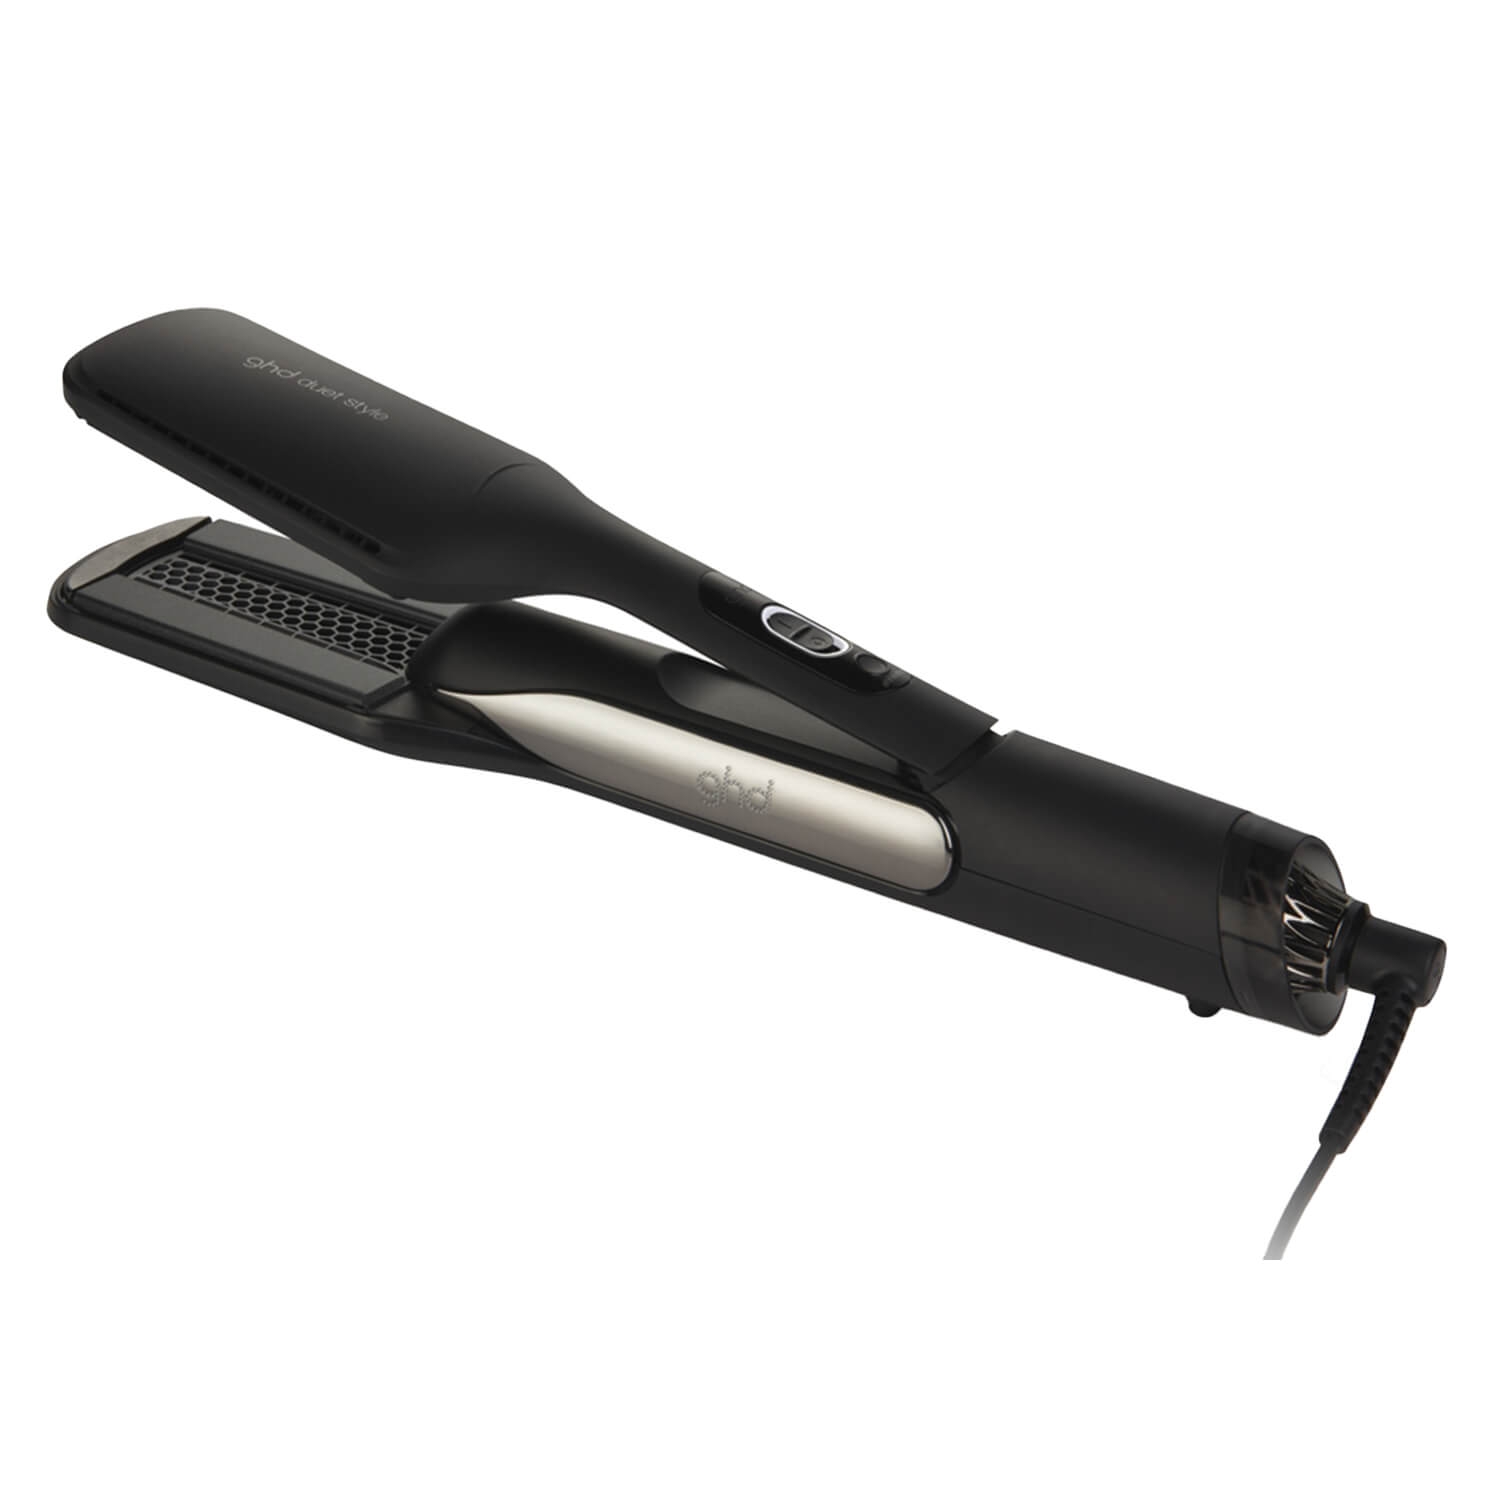 Product image from ghd Tools - ghd Duet Style Hot Air Styler Black